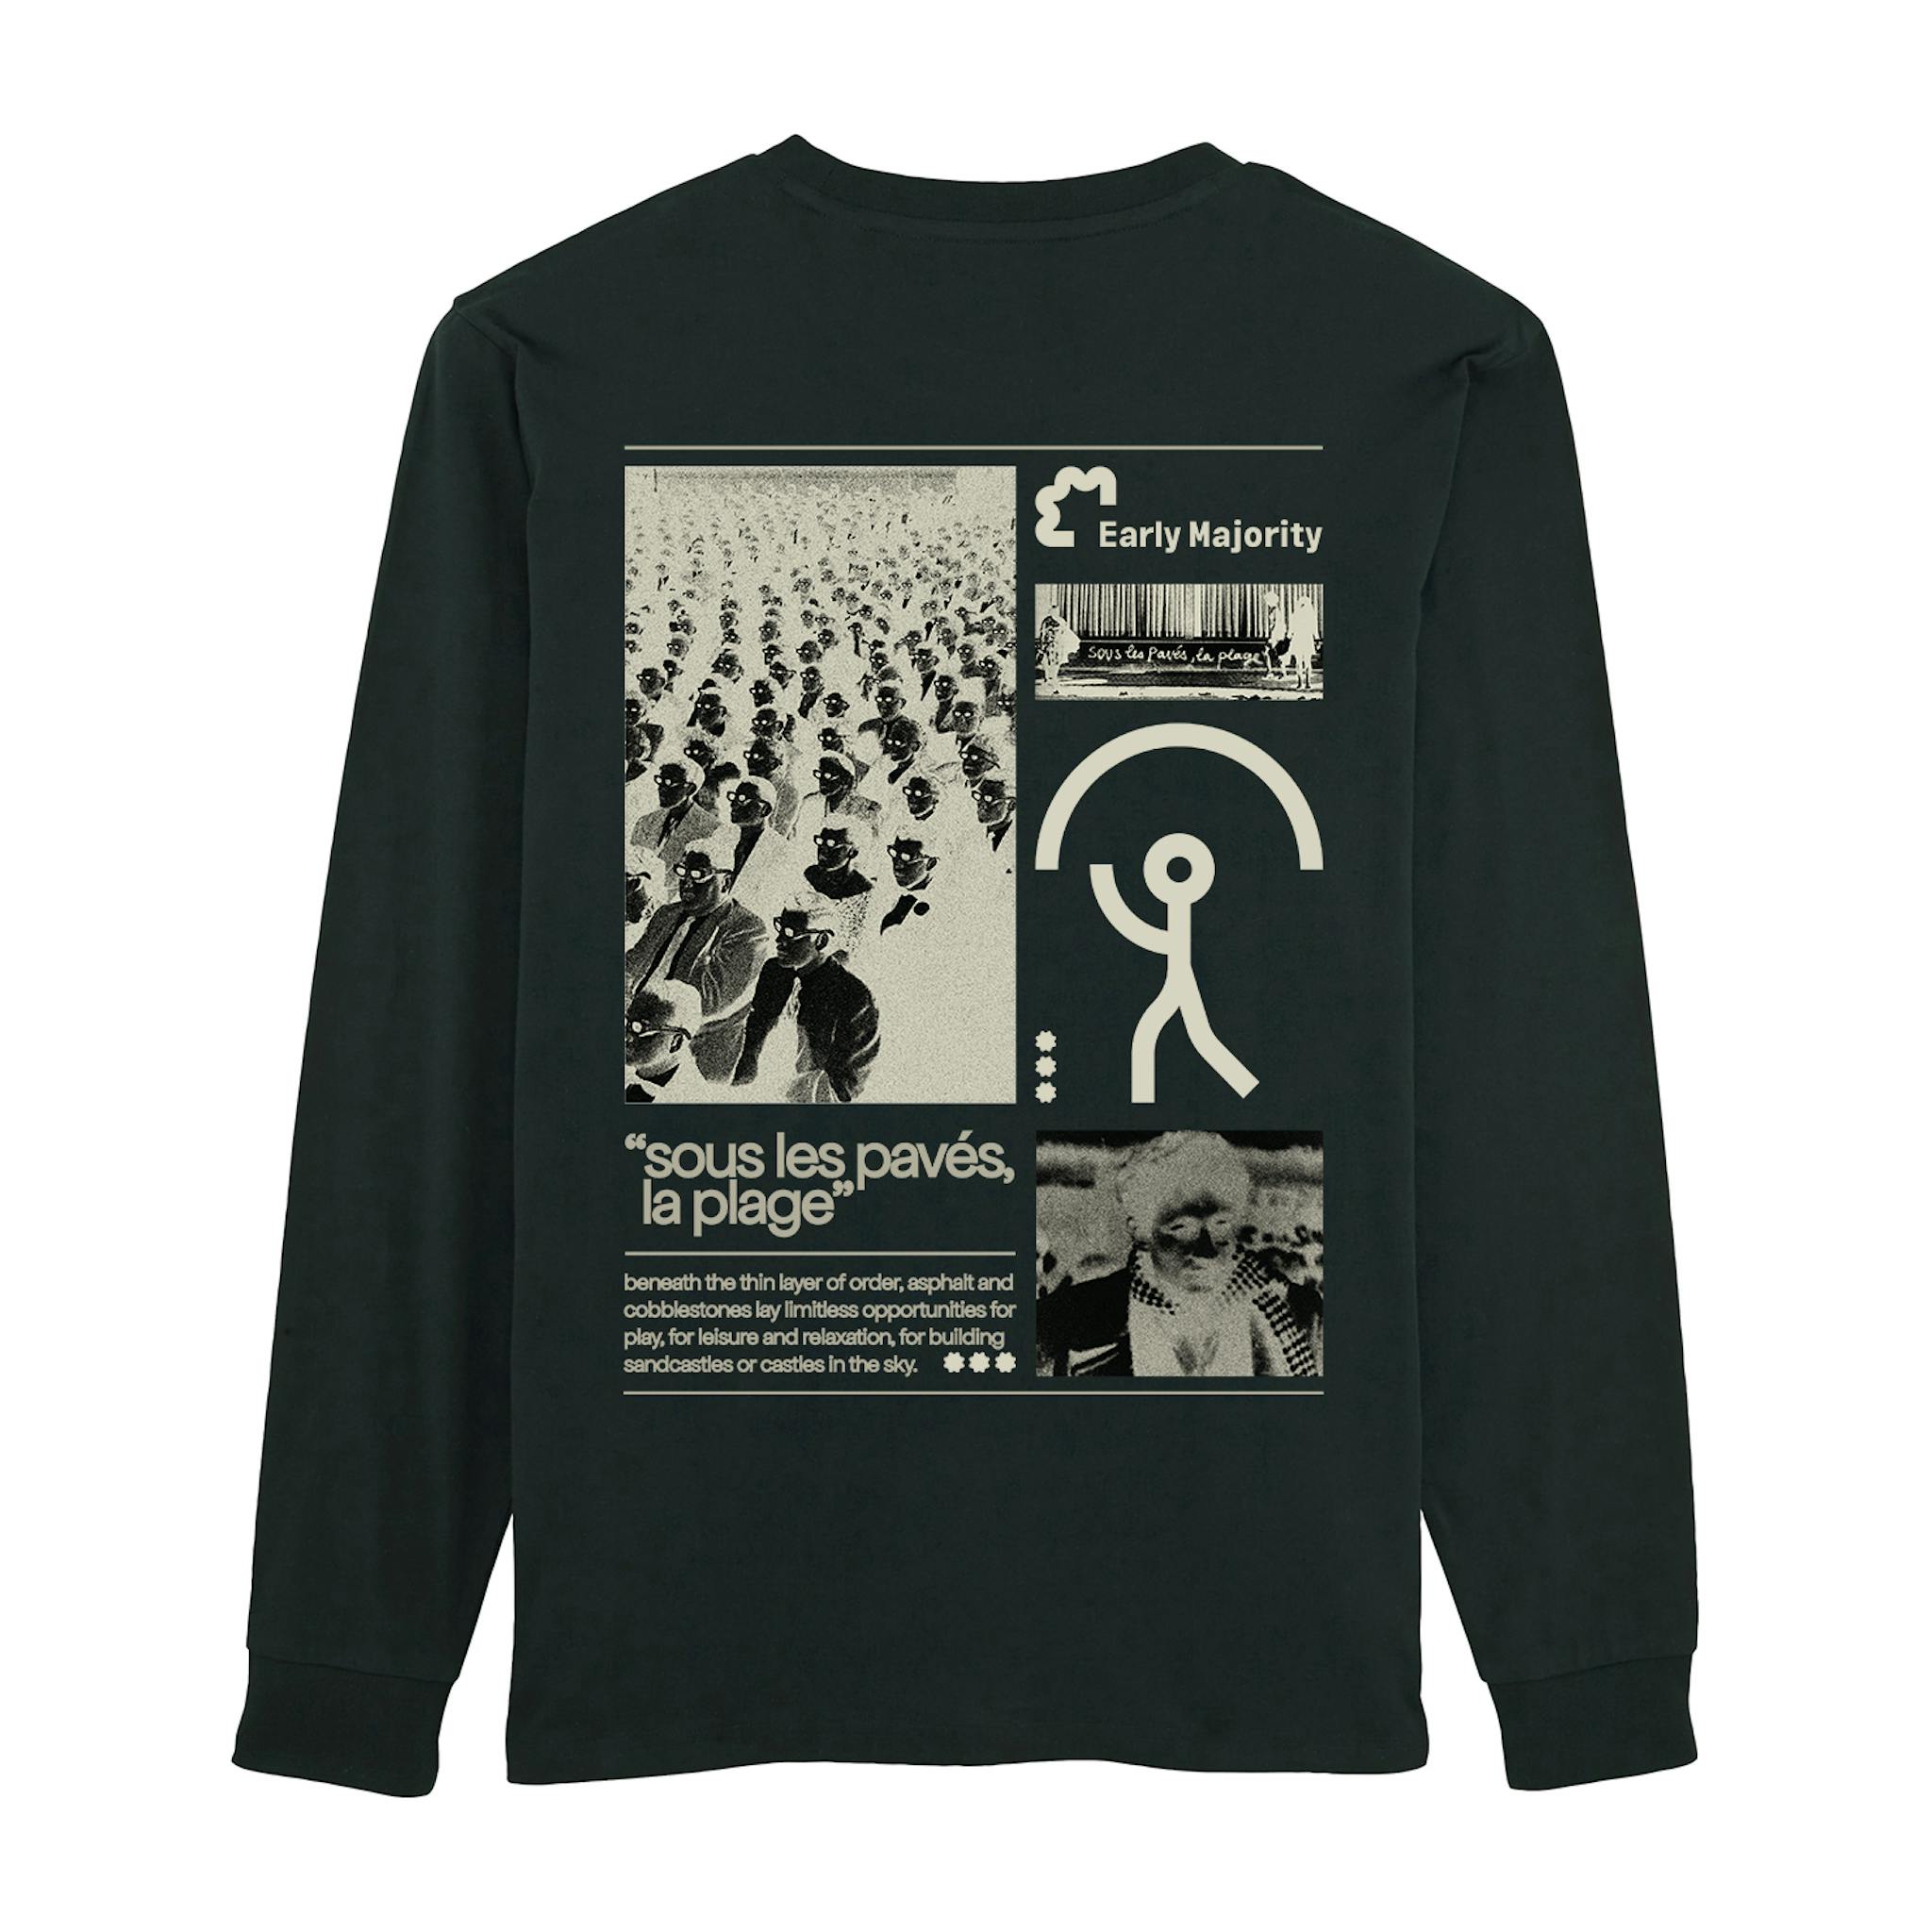 A long sleeve black shirt with various negative images placed around with french text. 